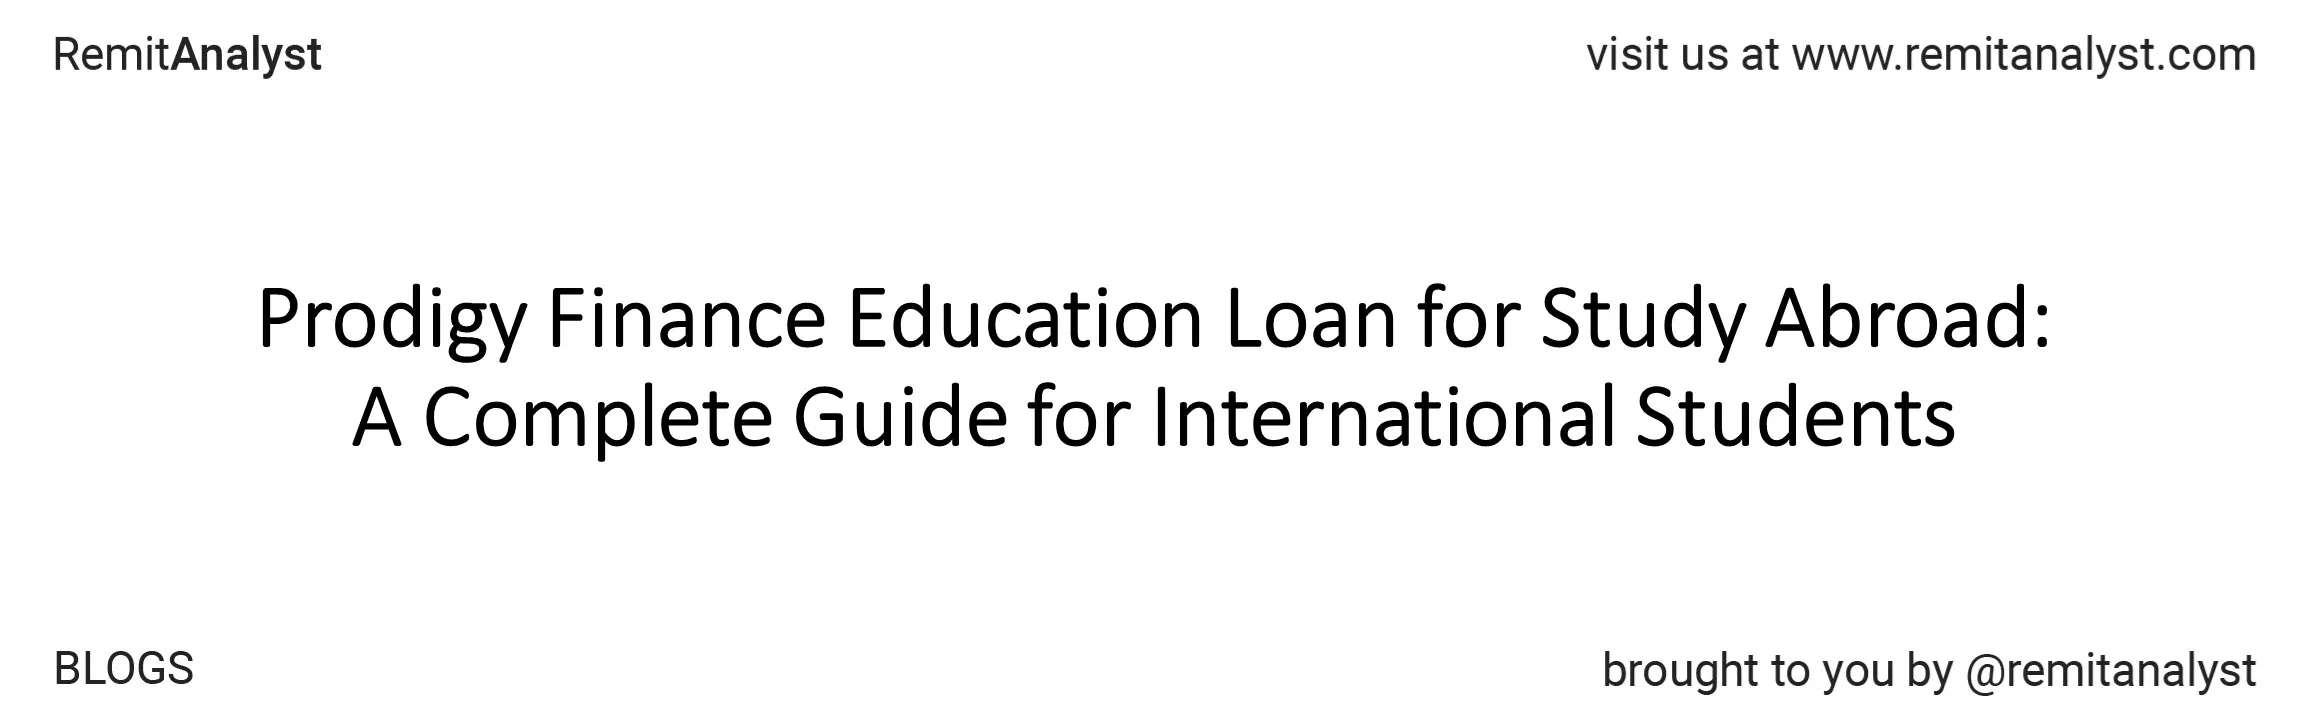 prodigy-finance-education-loan-for-study-abroad-title